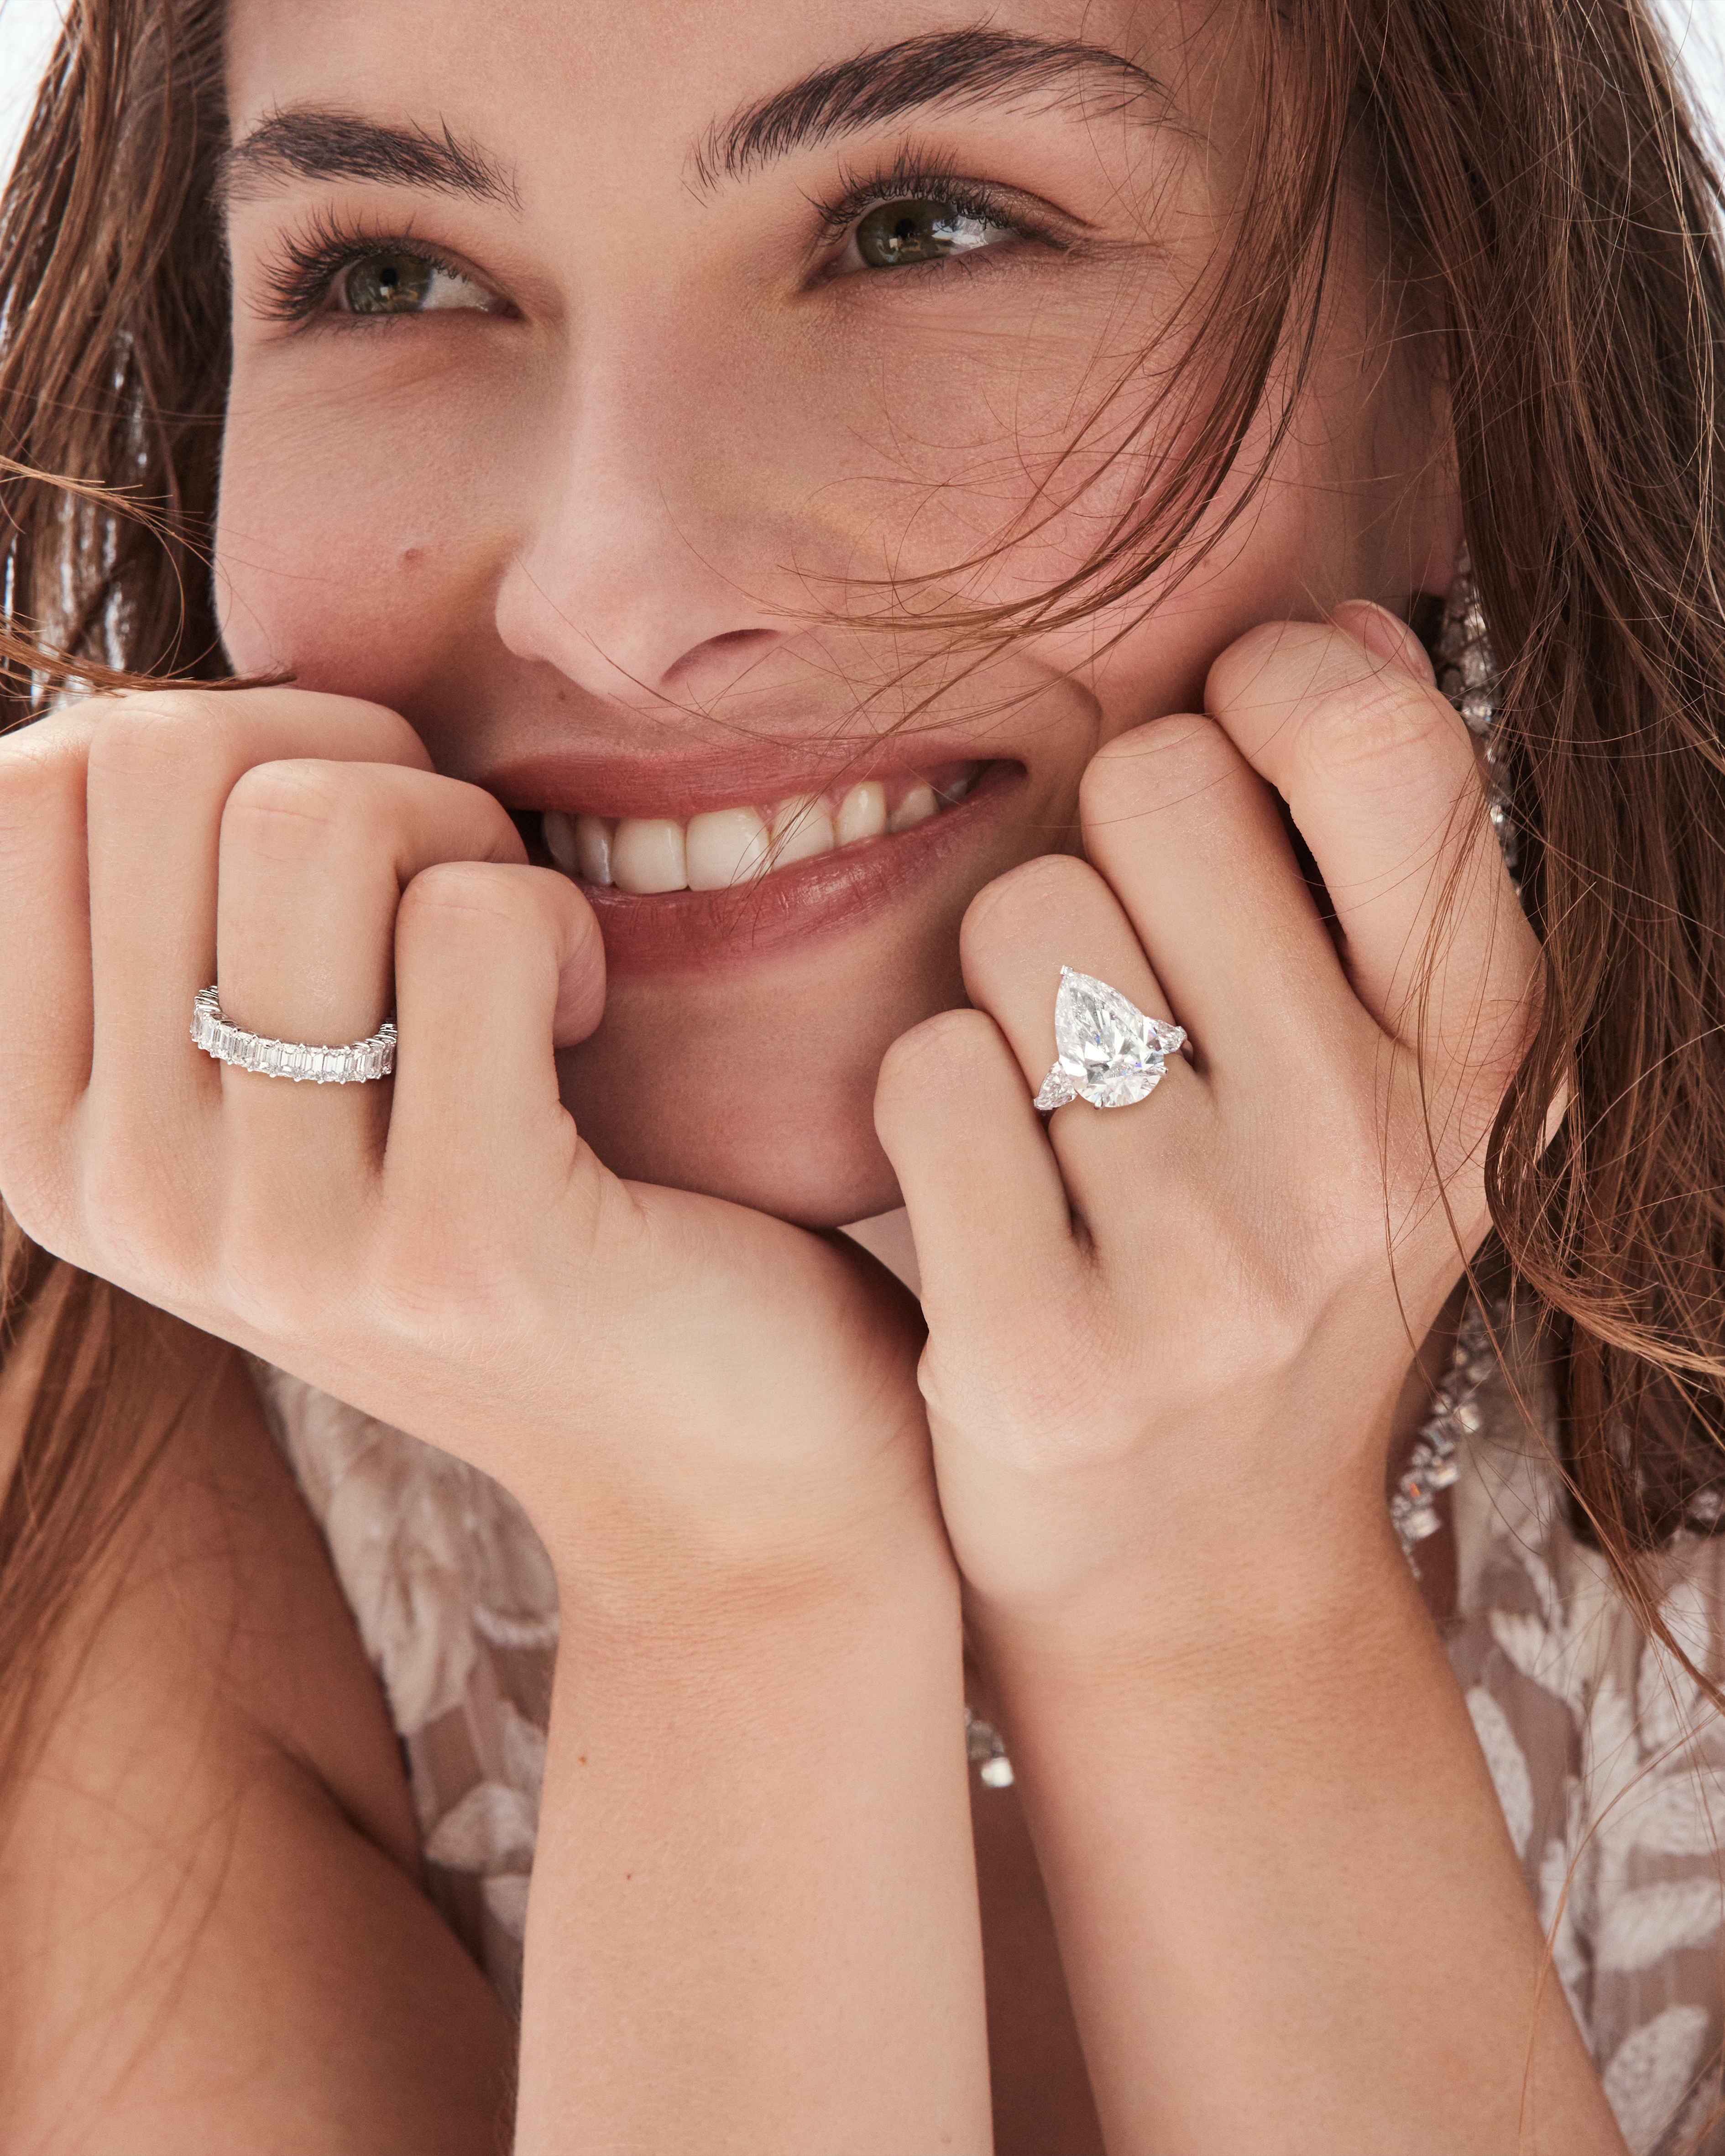 The Glorious Marriage of Denim And Diamonds - Only Natural Diamonds